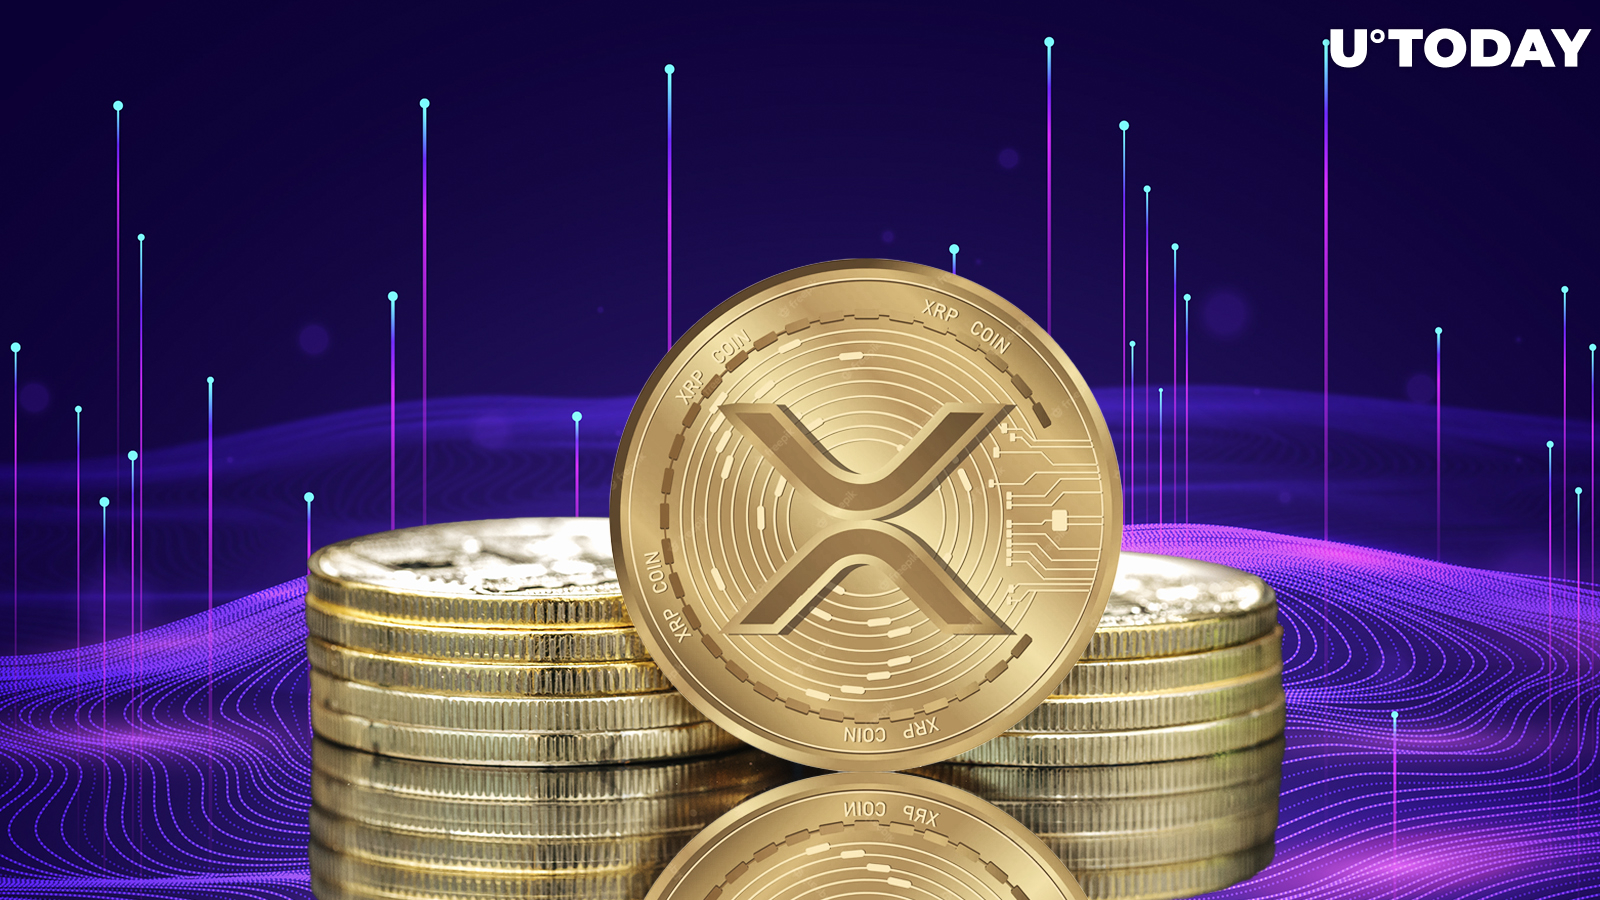 XRP Ledger Hits Massive Milestone in Epic Network Growth